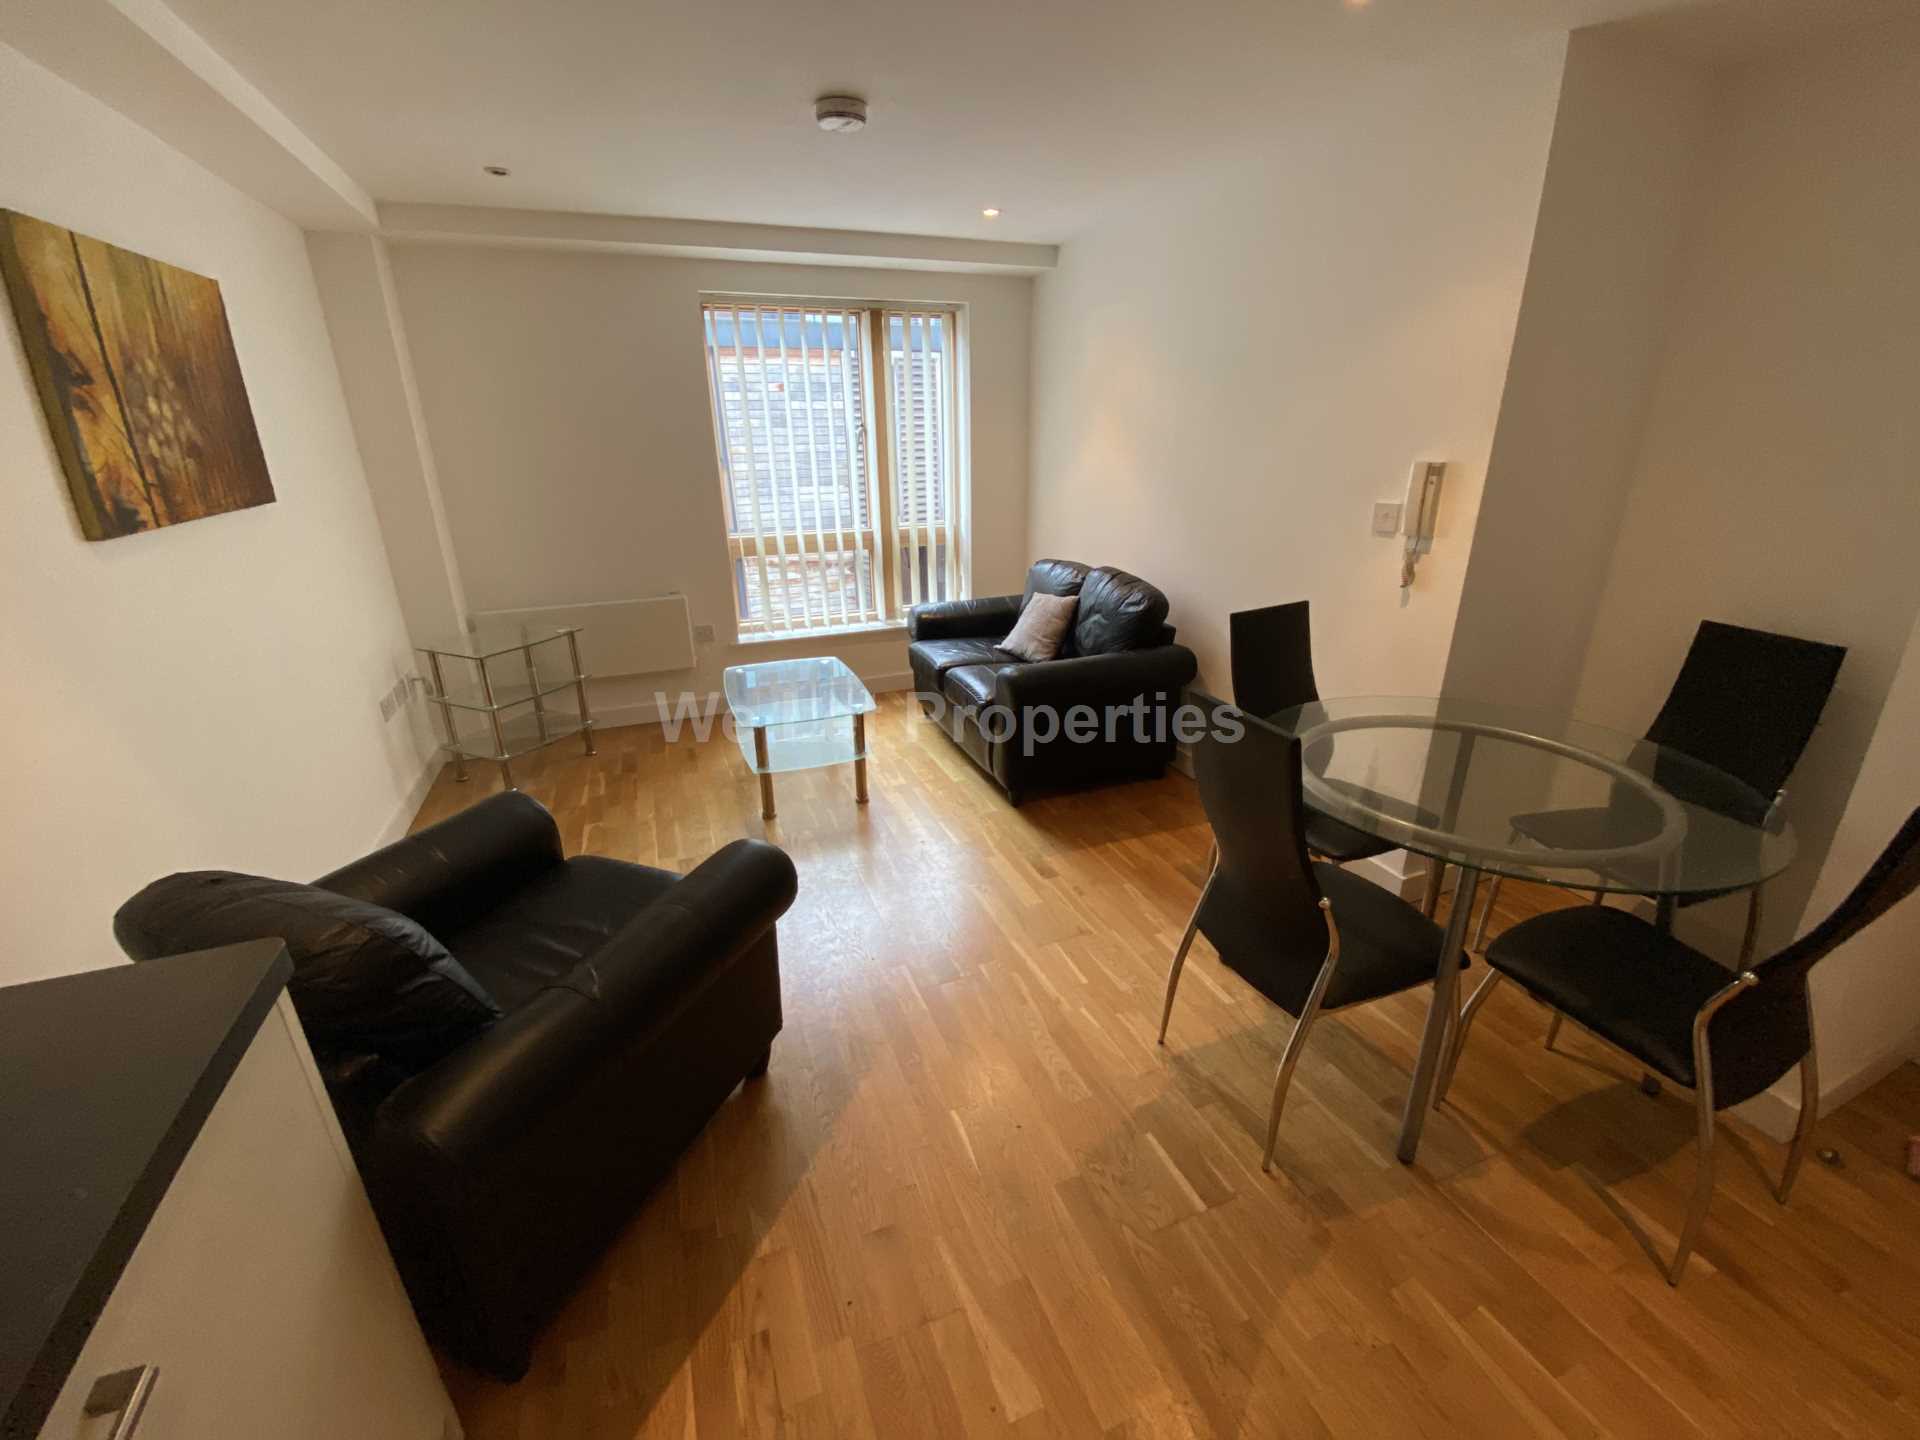 1 bed Apartment for rent in Manchester. From We Let Properties - Manchester